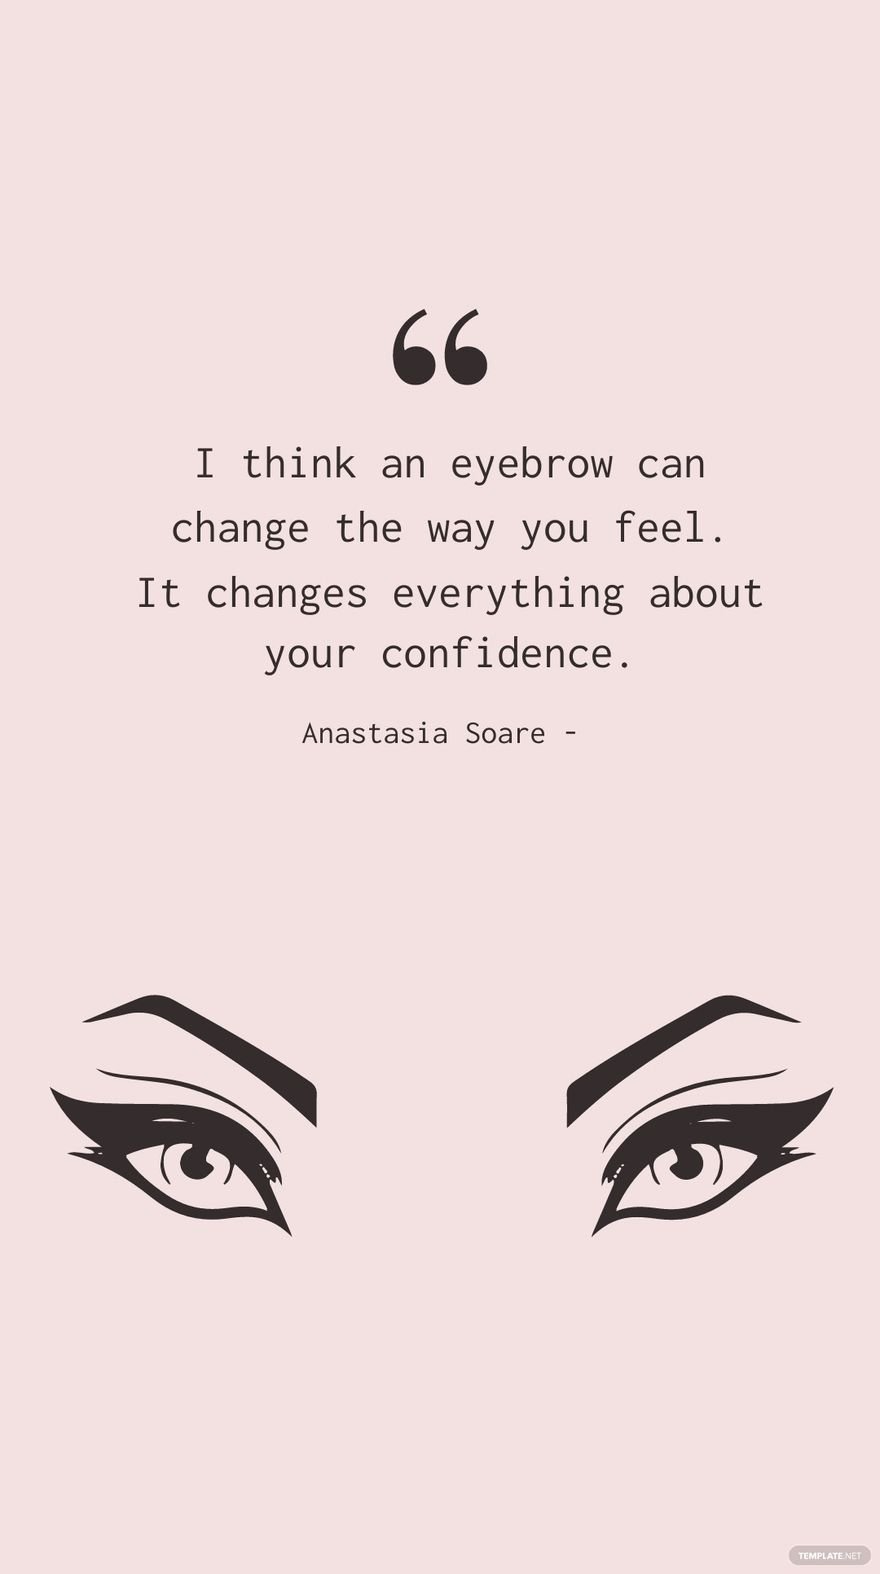 Free Anastasia Soare - I think an eyebrow can change the way you feel. It changes everything about your confidence. in JPG